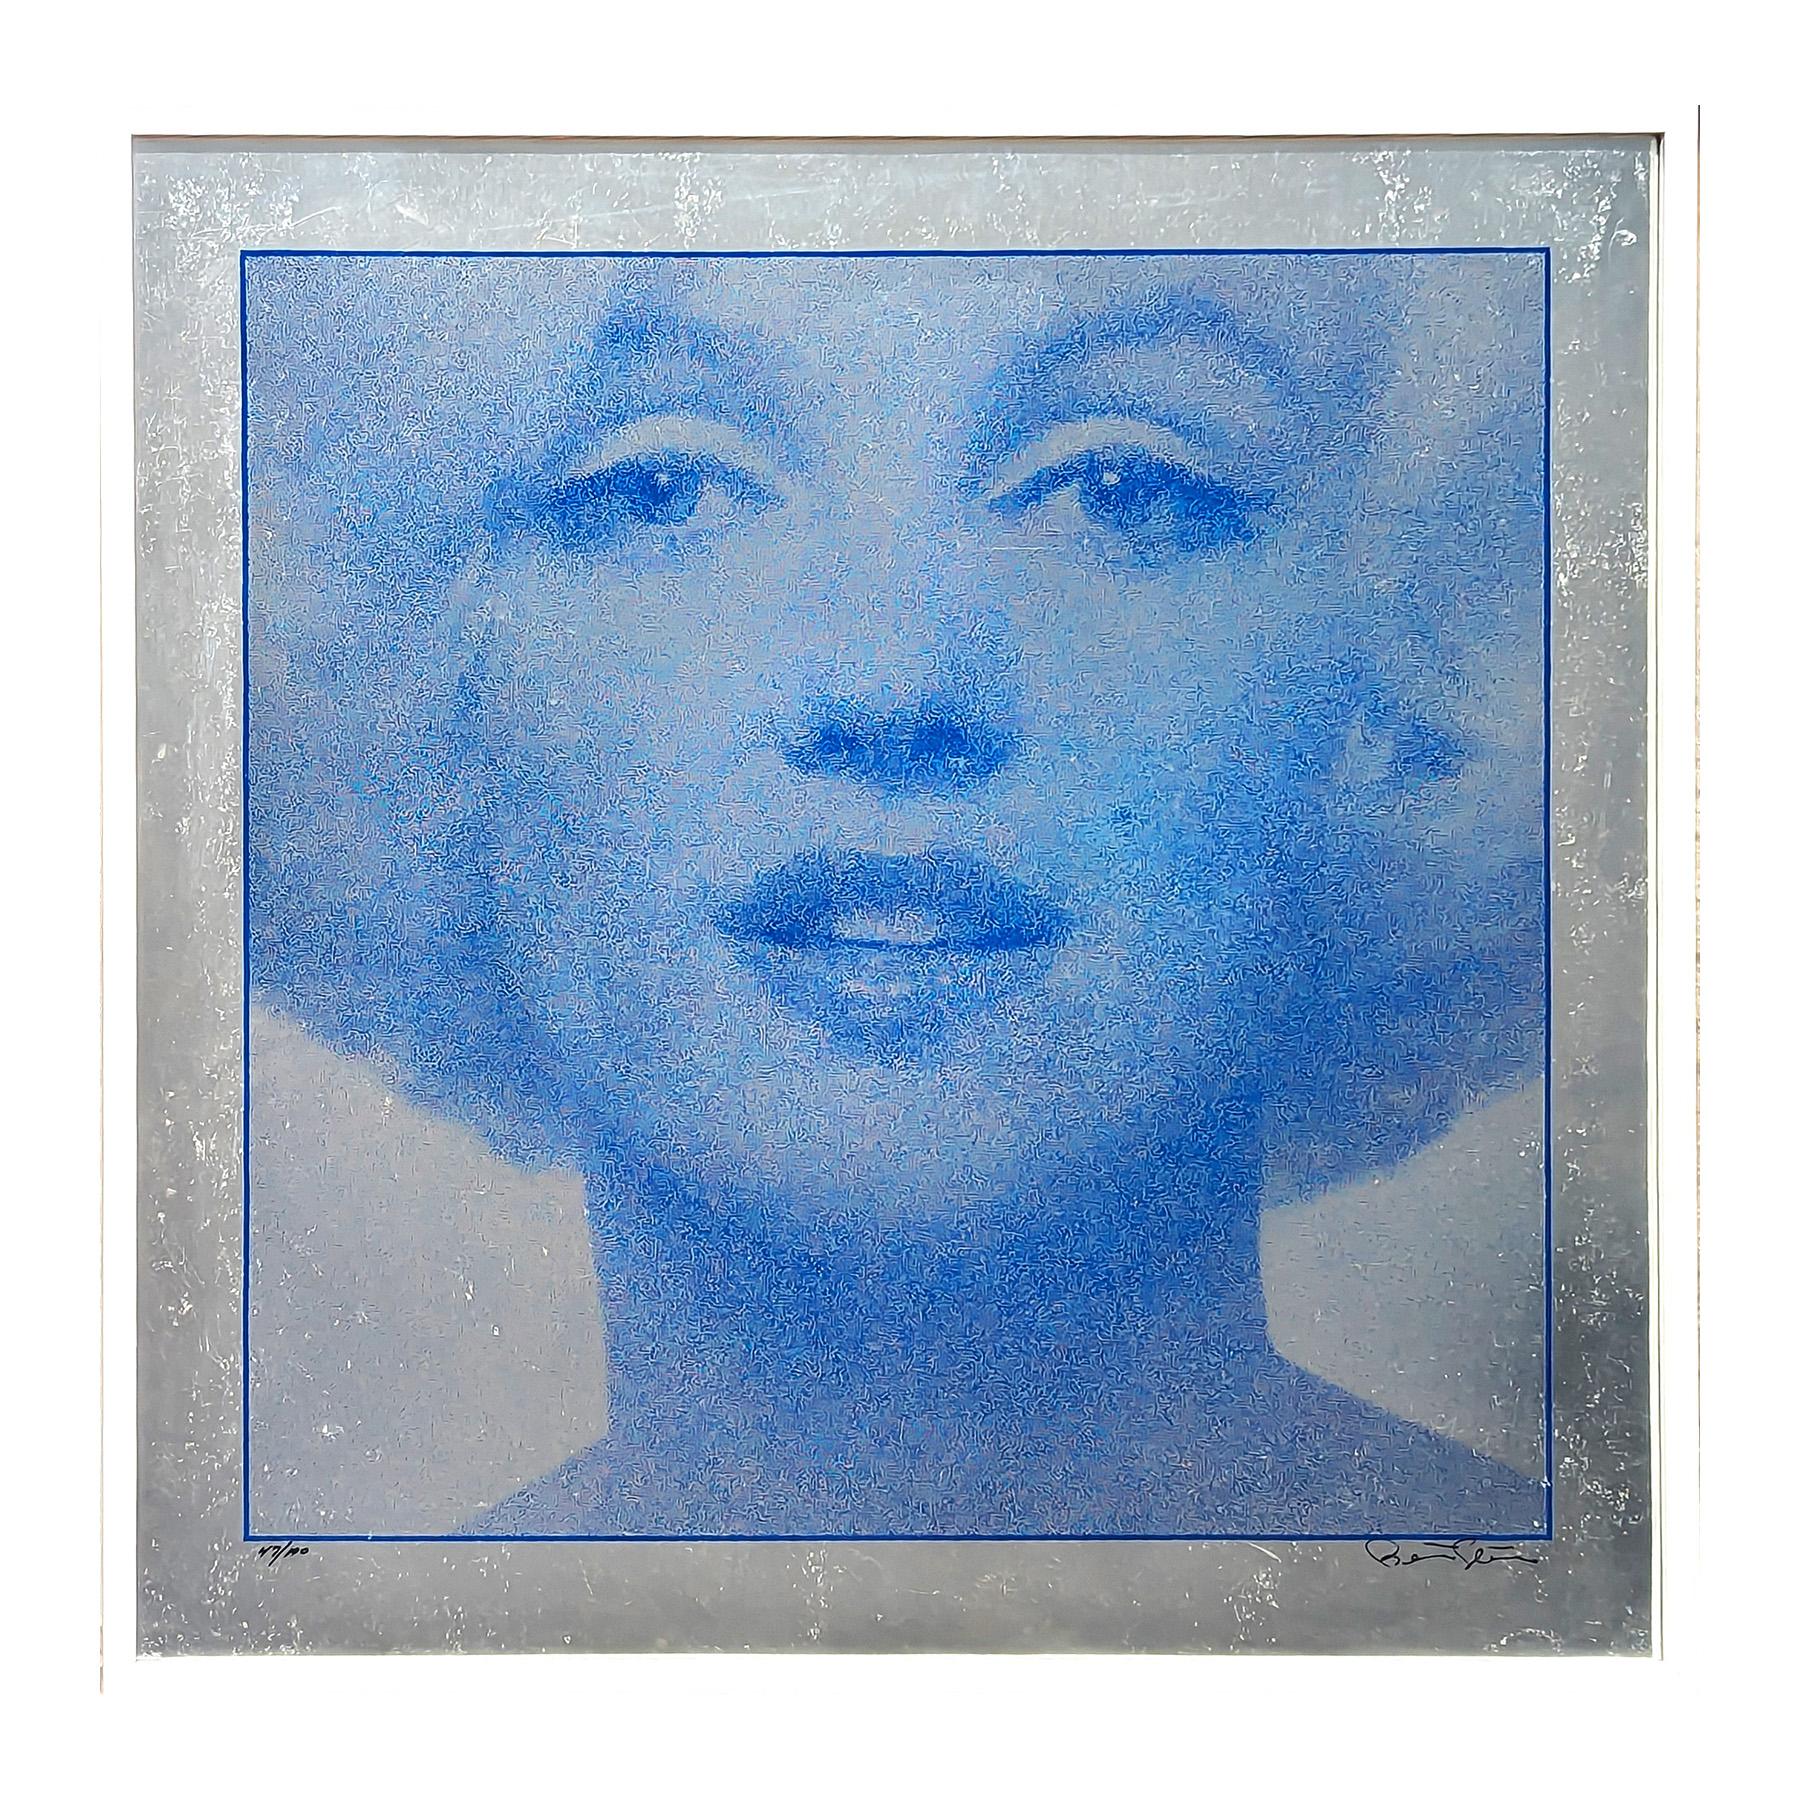 Blue-toned silkscreen portrait print of actress Marilyn Monroe by legendary photographer Bert Stern. The piece features a blue headshot portrait of Marilyn in blue on a metallic silver foil. 
Signed and editioned along the front lower margin.